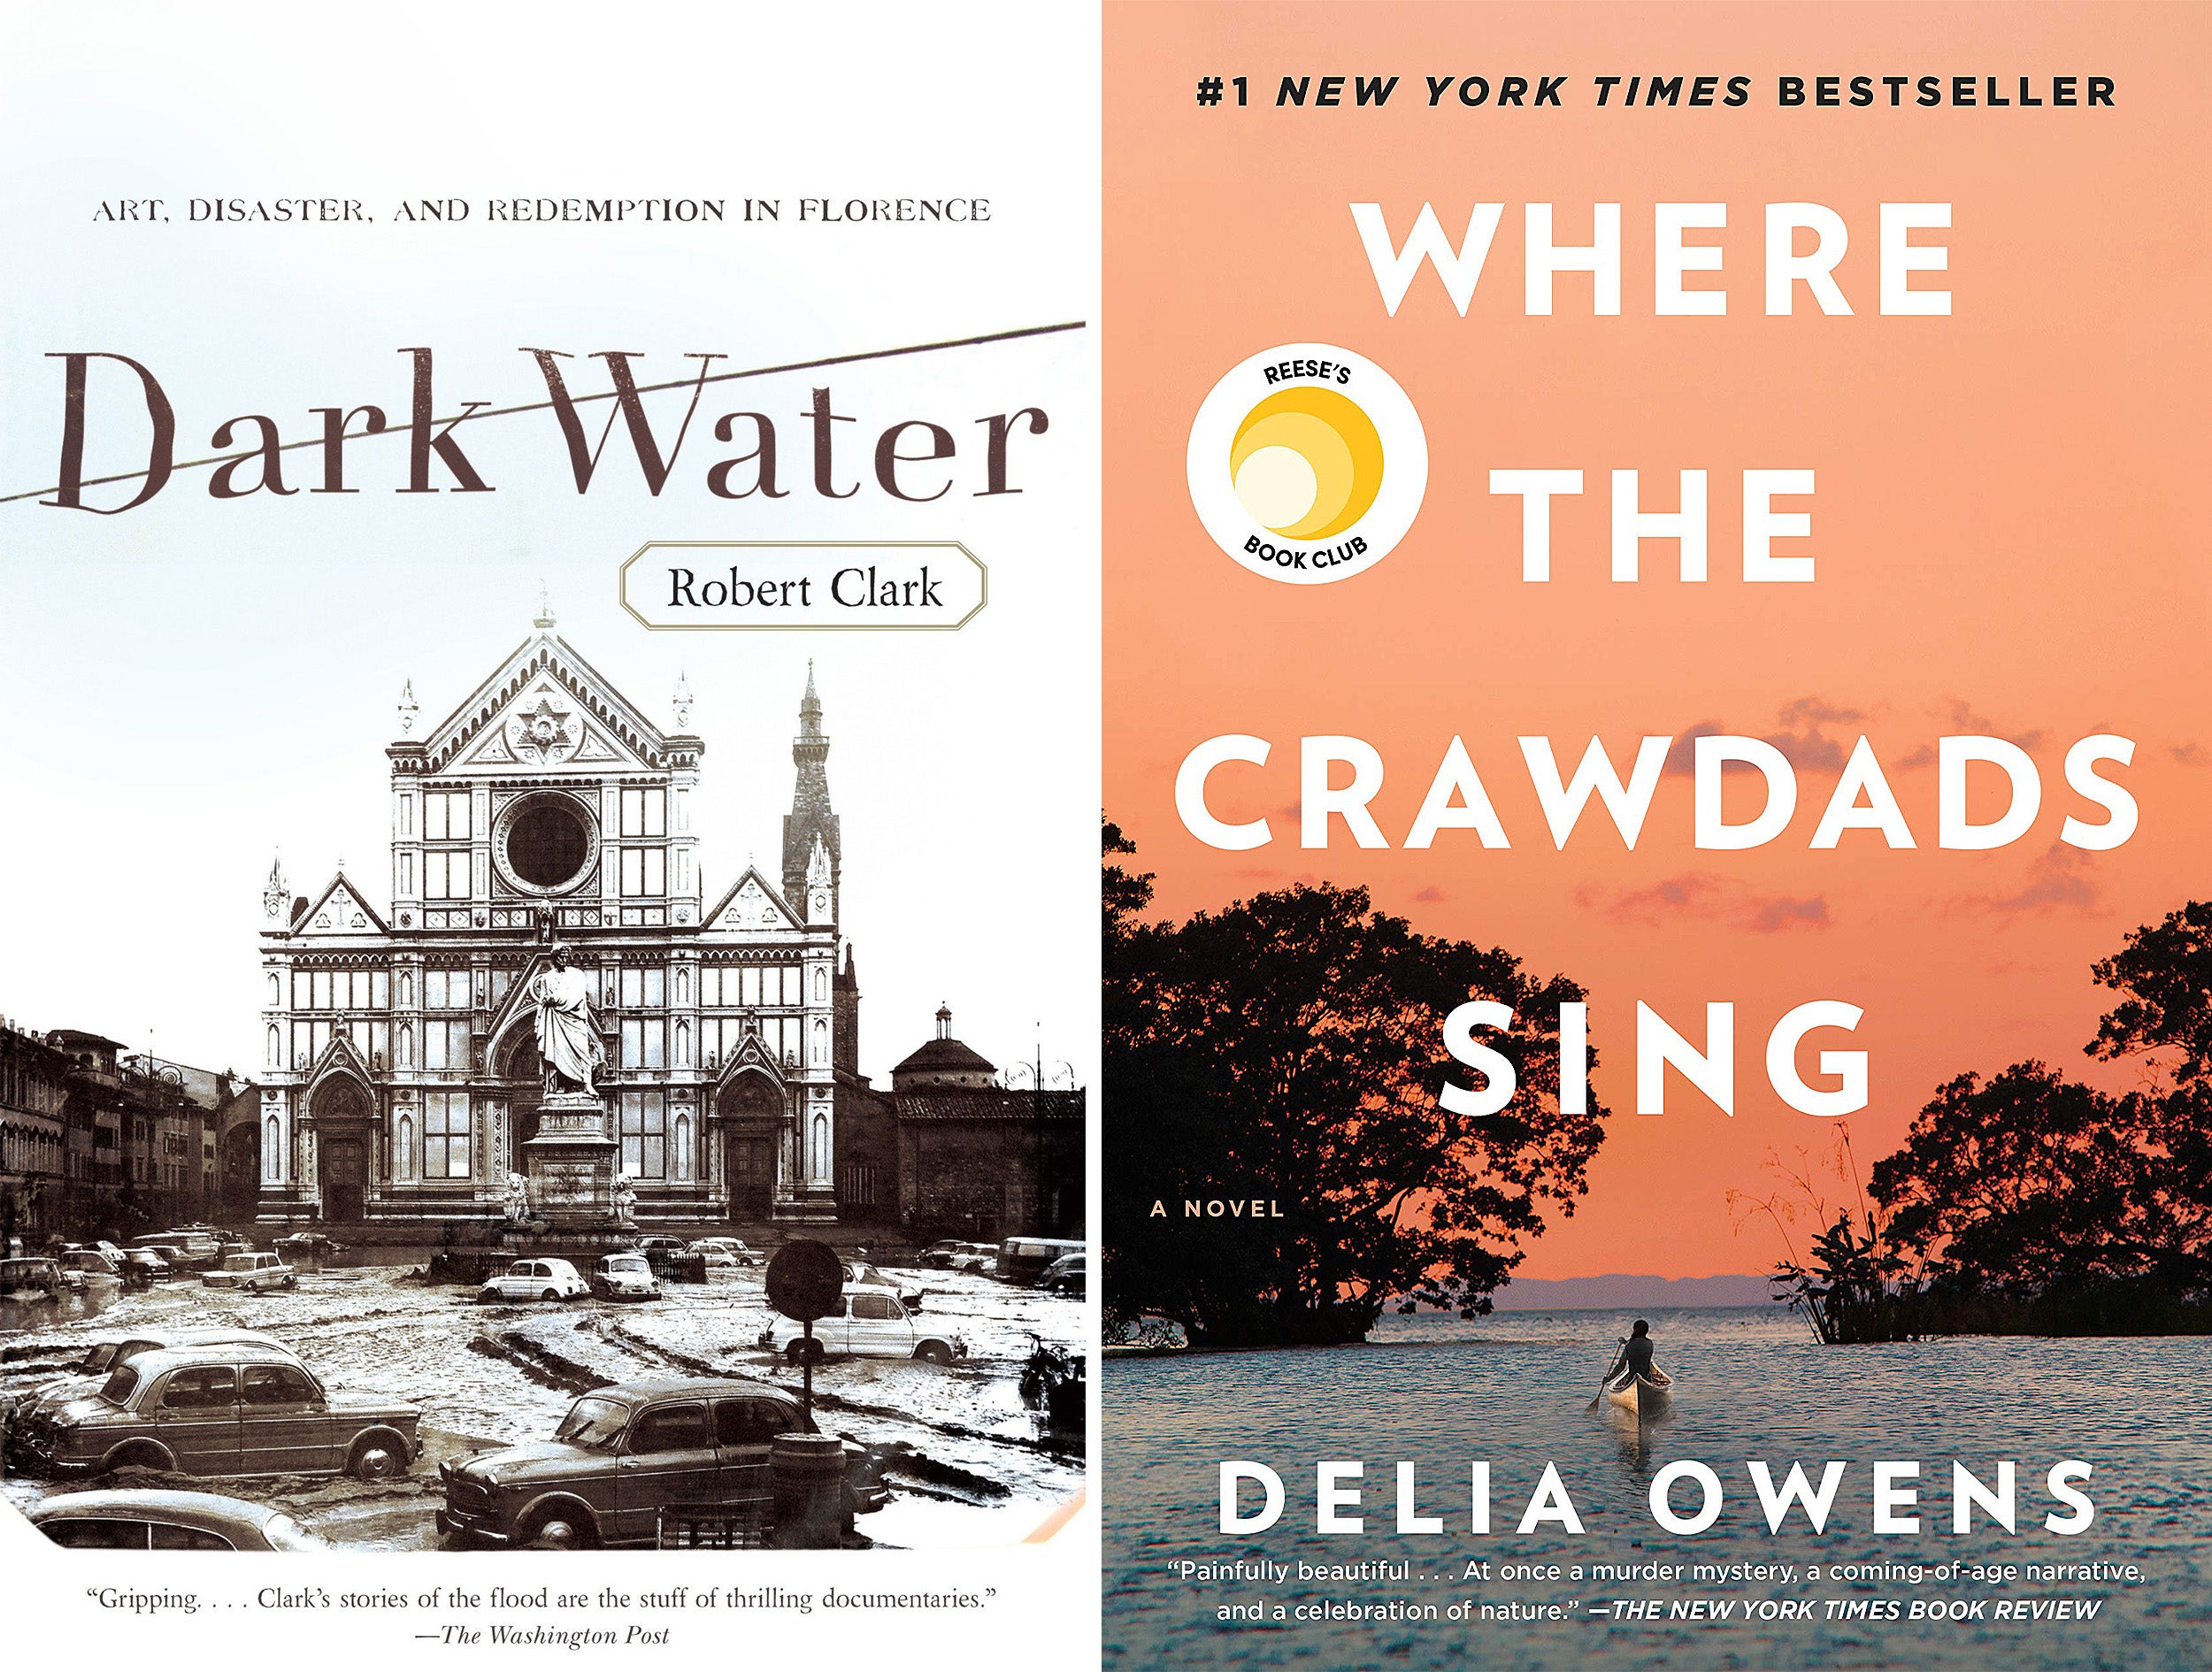 Dark Water and Where the Crawdads Sing book covers